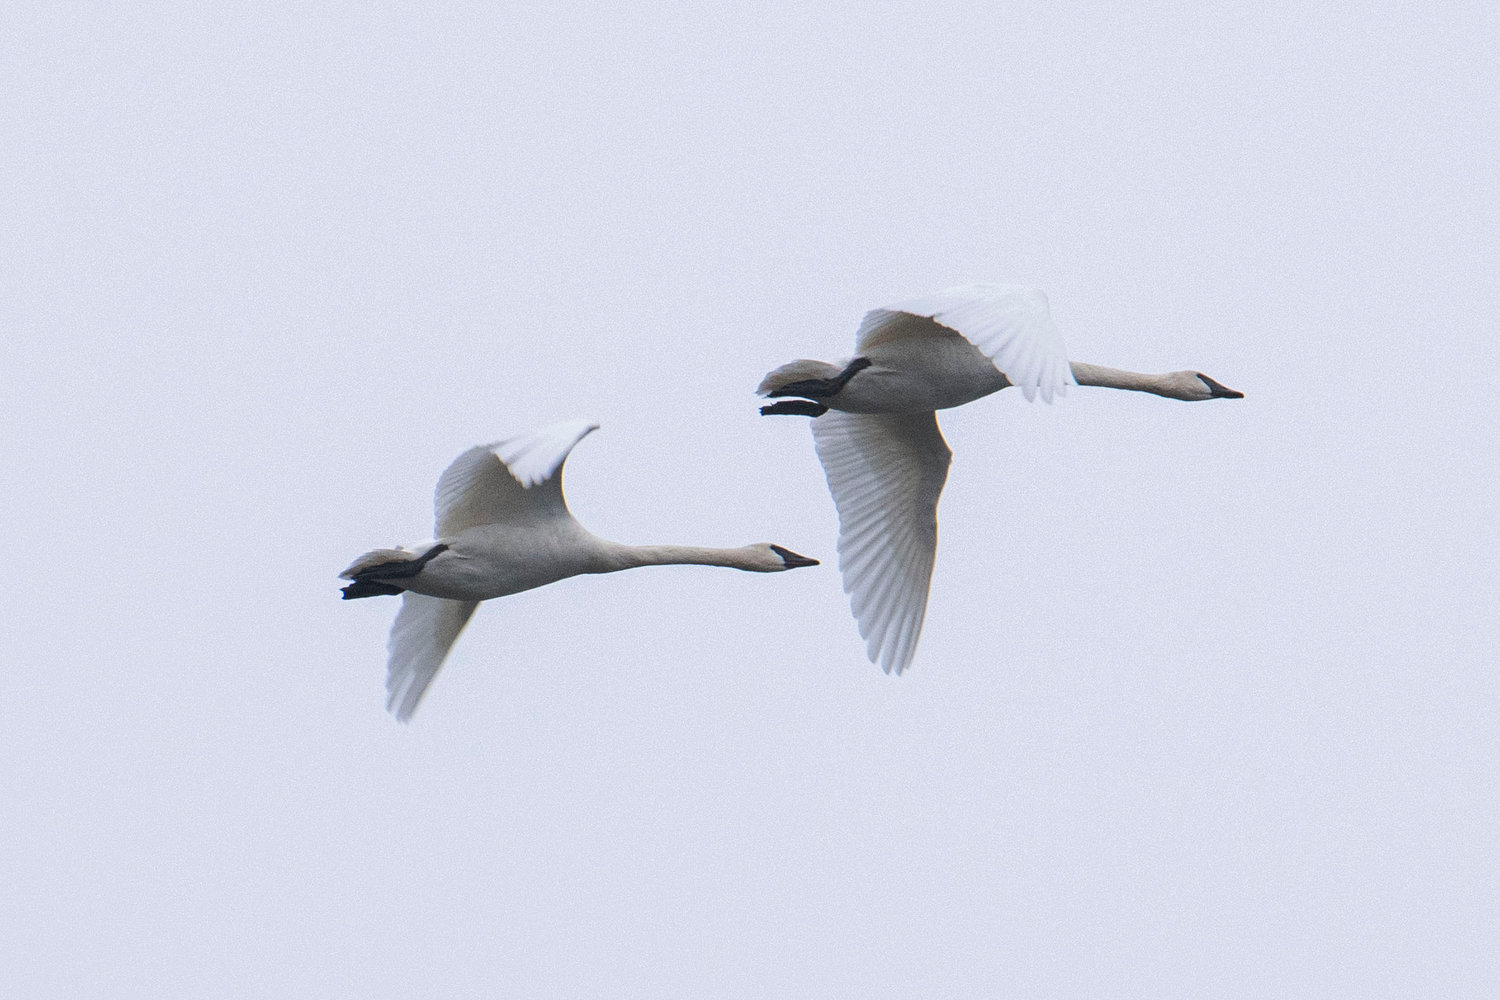 Trumpeter swans glide over the Willapa Hills Trail against gray skies on Friday in Chehalis.